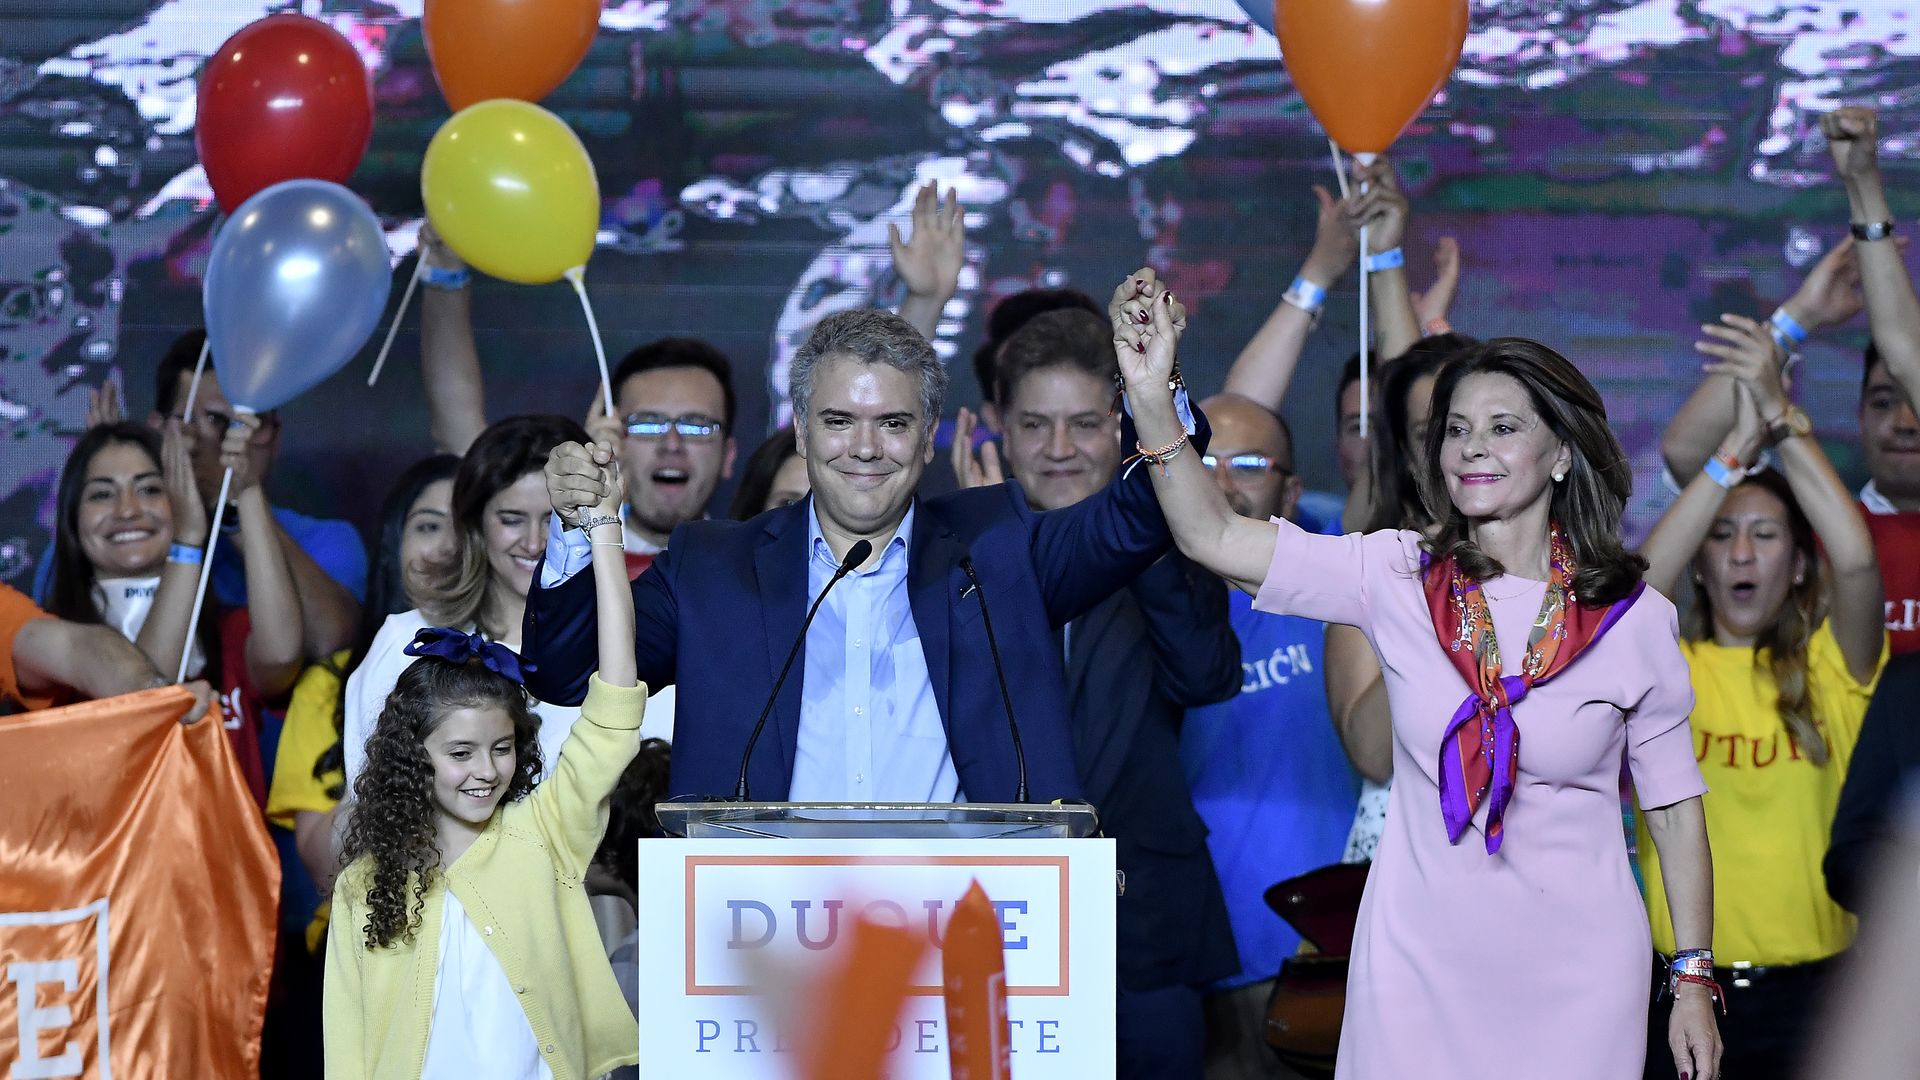  Ivan Duque, presidential candidate for the Centro Democratico party, celebrate after winning the first round Presidential Elections in Colombia on May 27, 2018, in Bogota, Colombia.